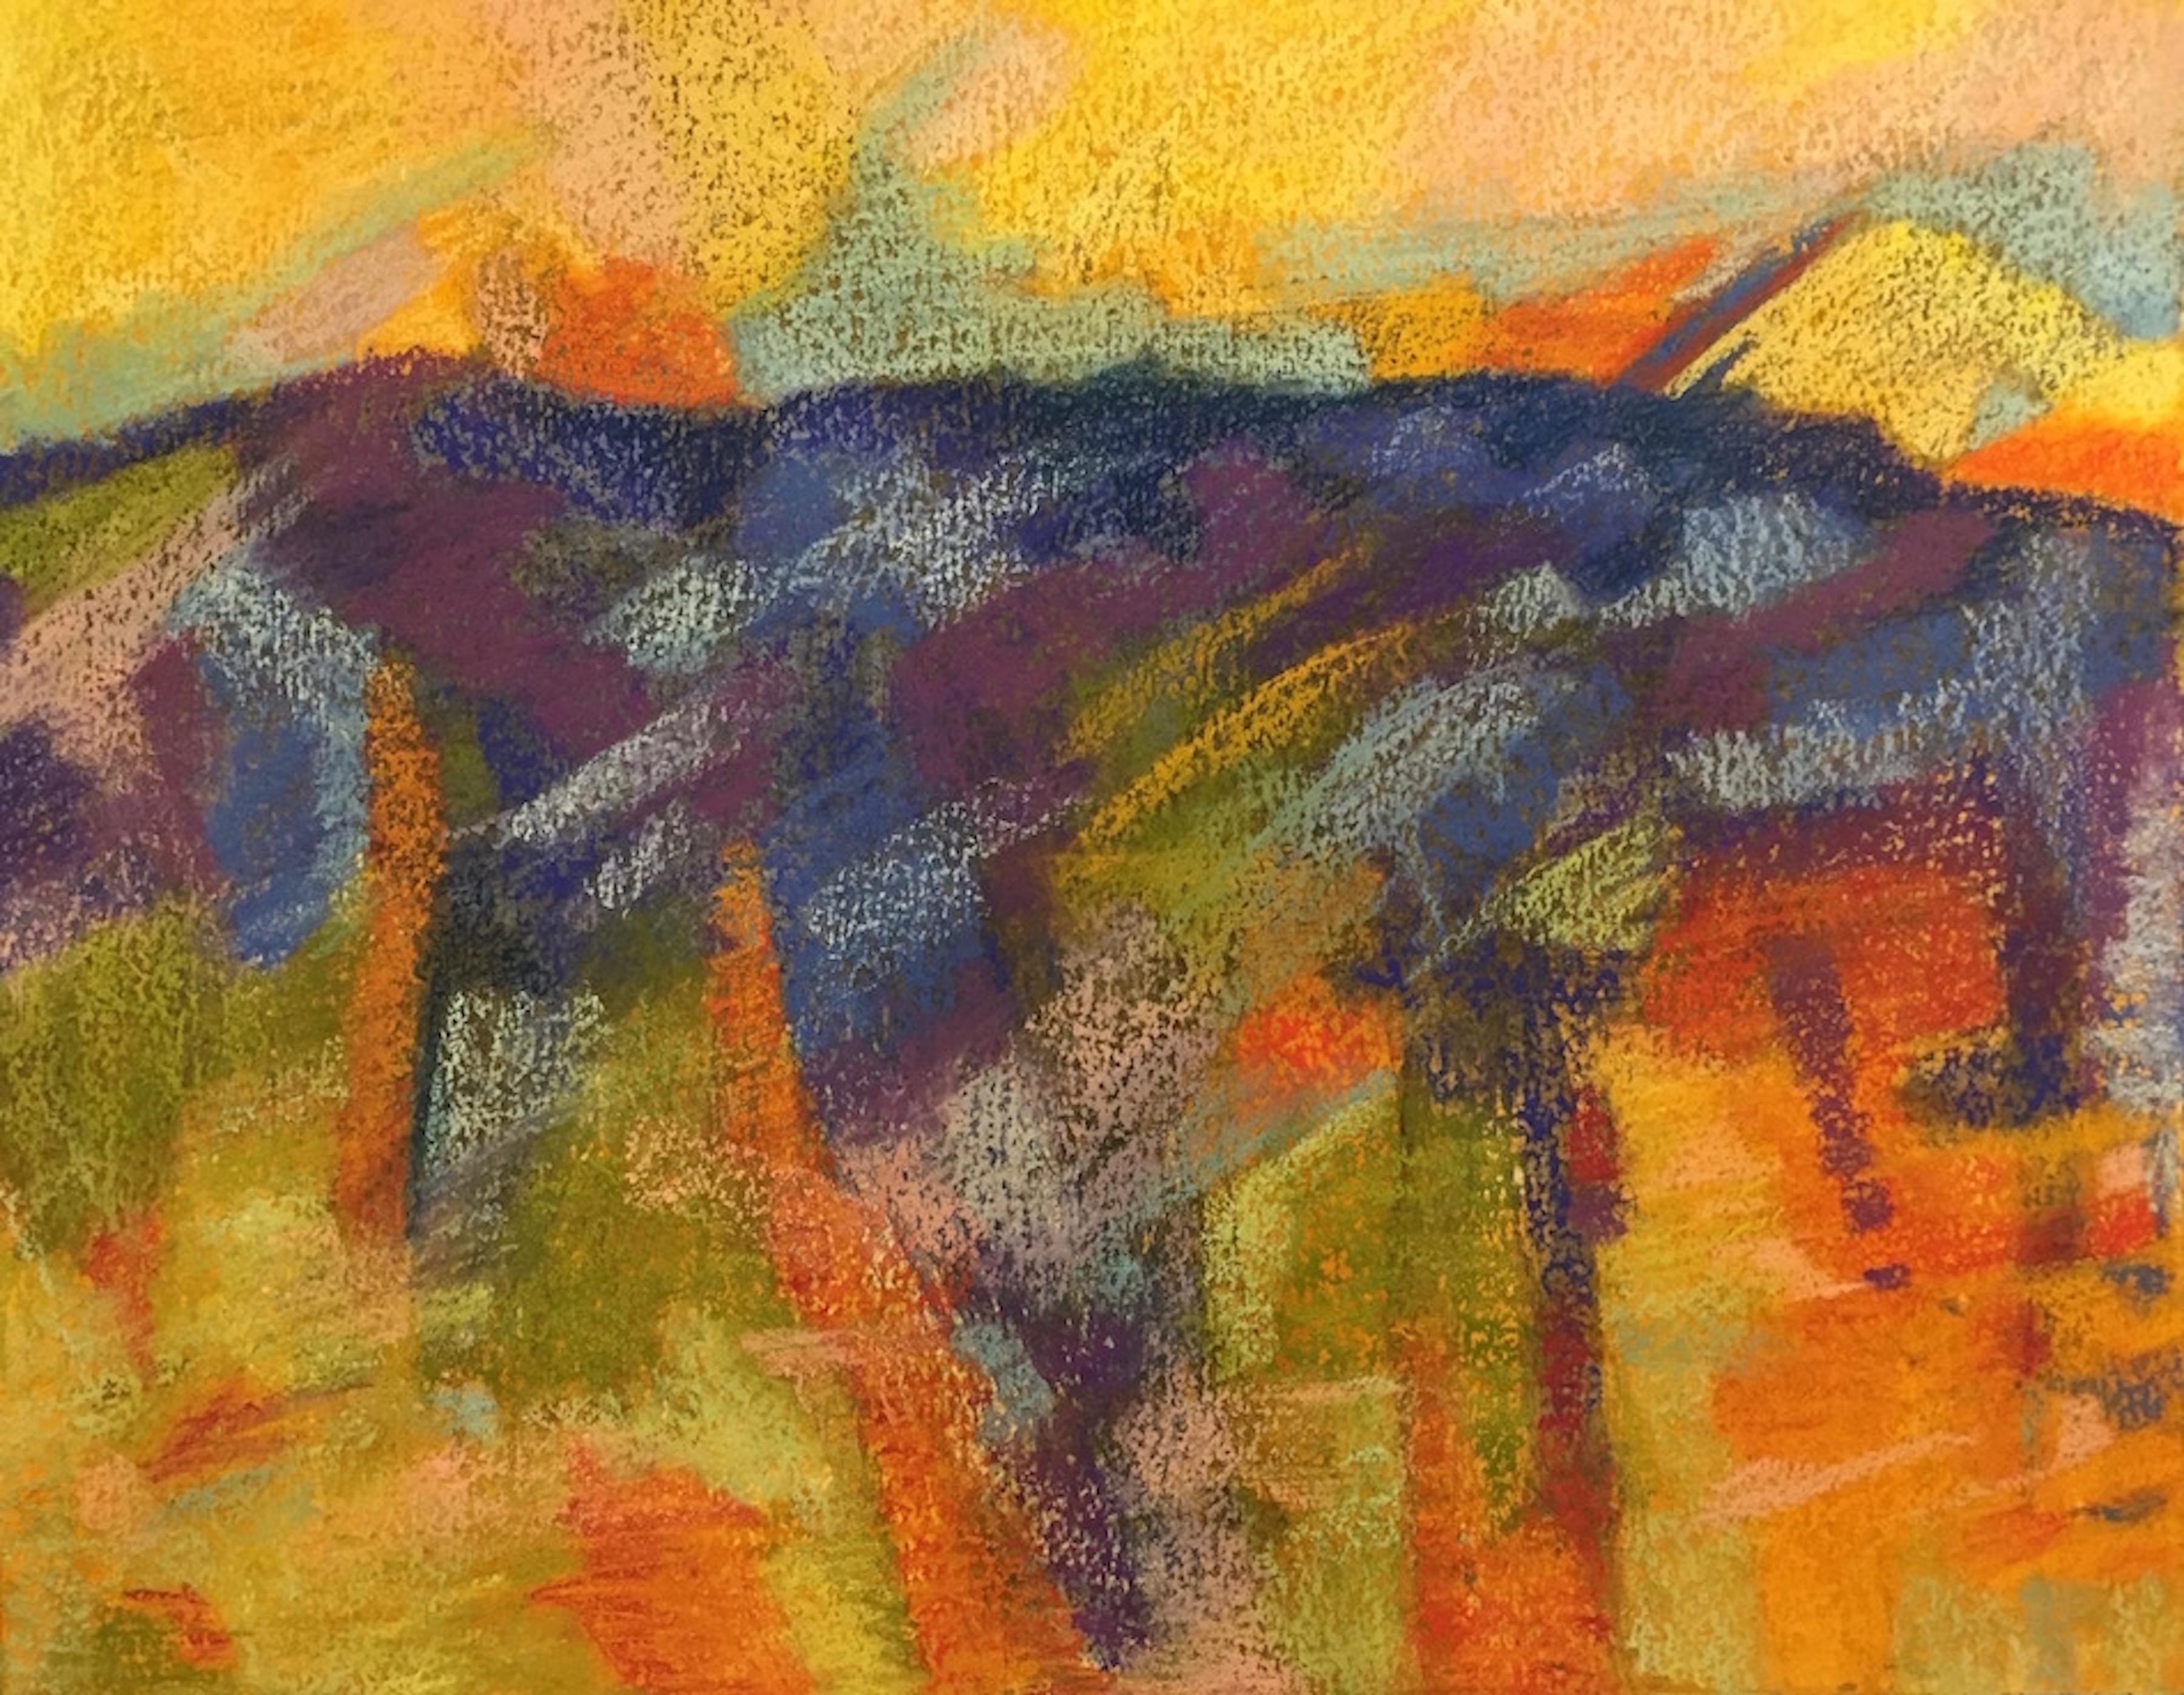 This mixed media abstracted landscape is full of bright yellows, oranges and the compliments of blues. It represents a magical landscape of a mountainous area that is somewhat abstracted and brought to life by the use of vivid complimentary